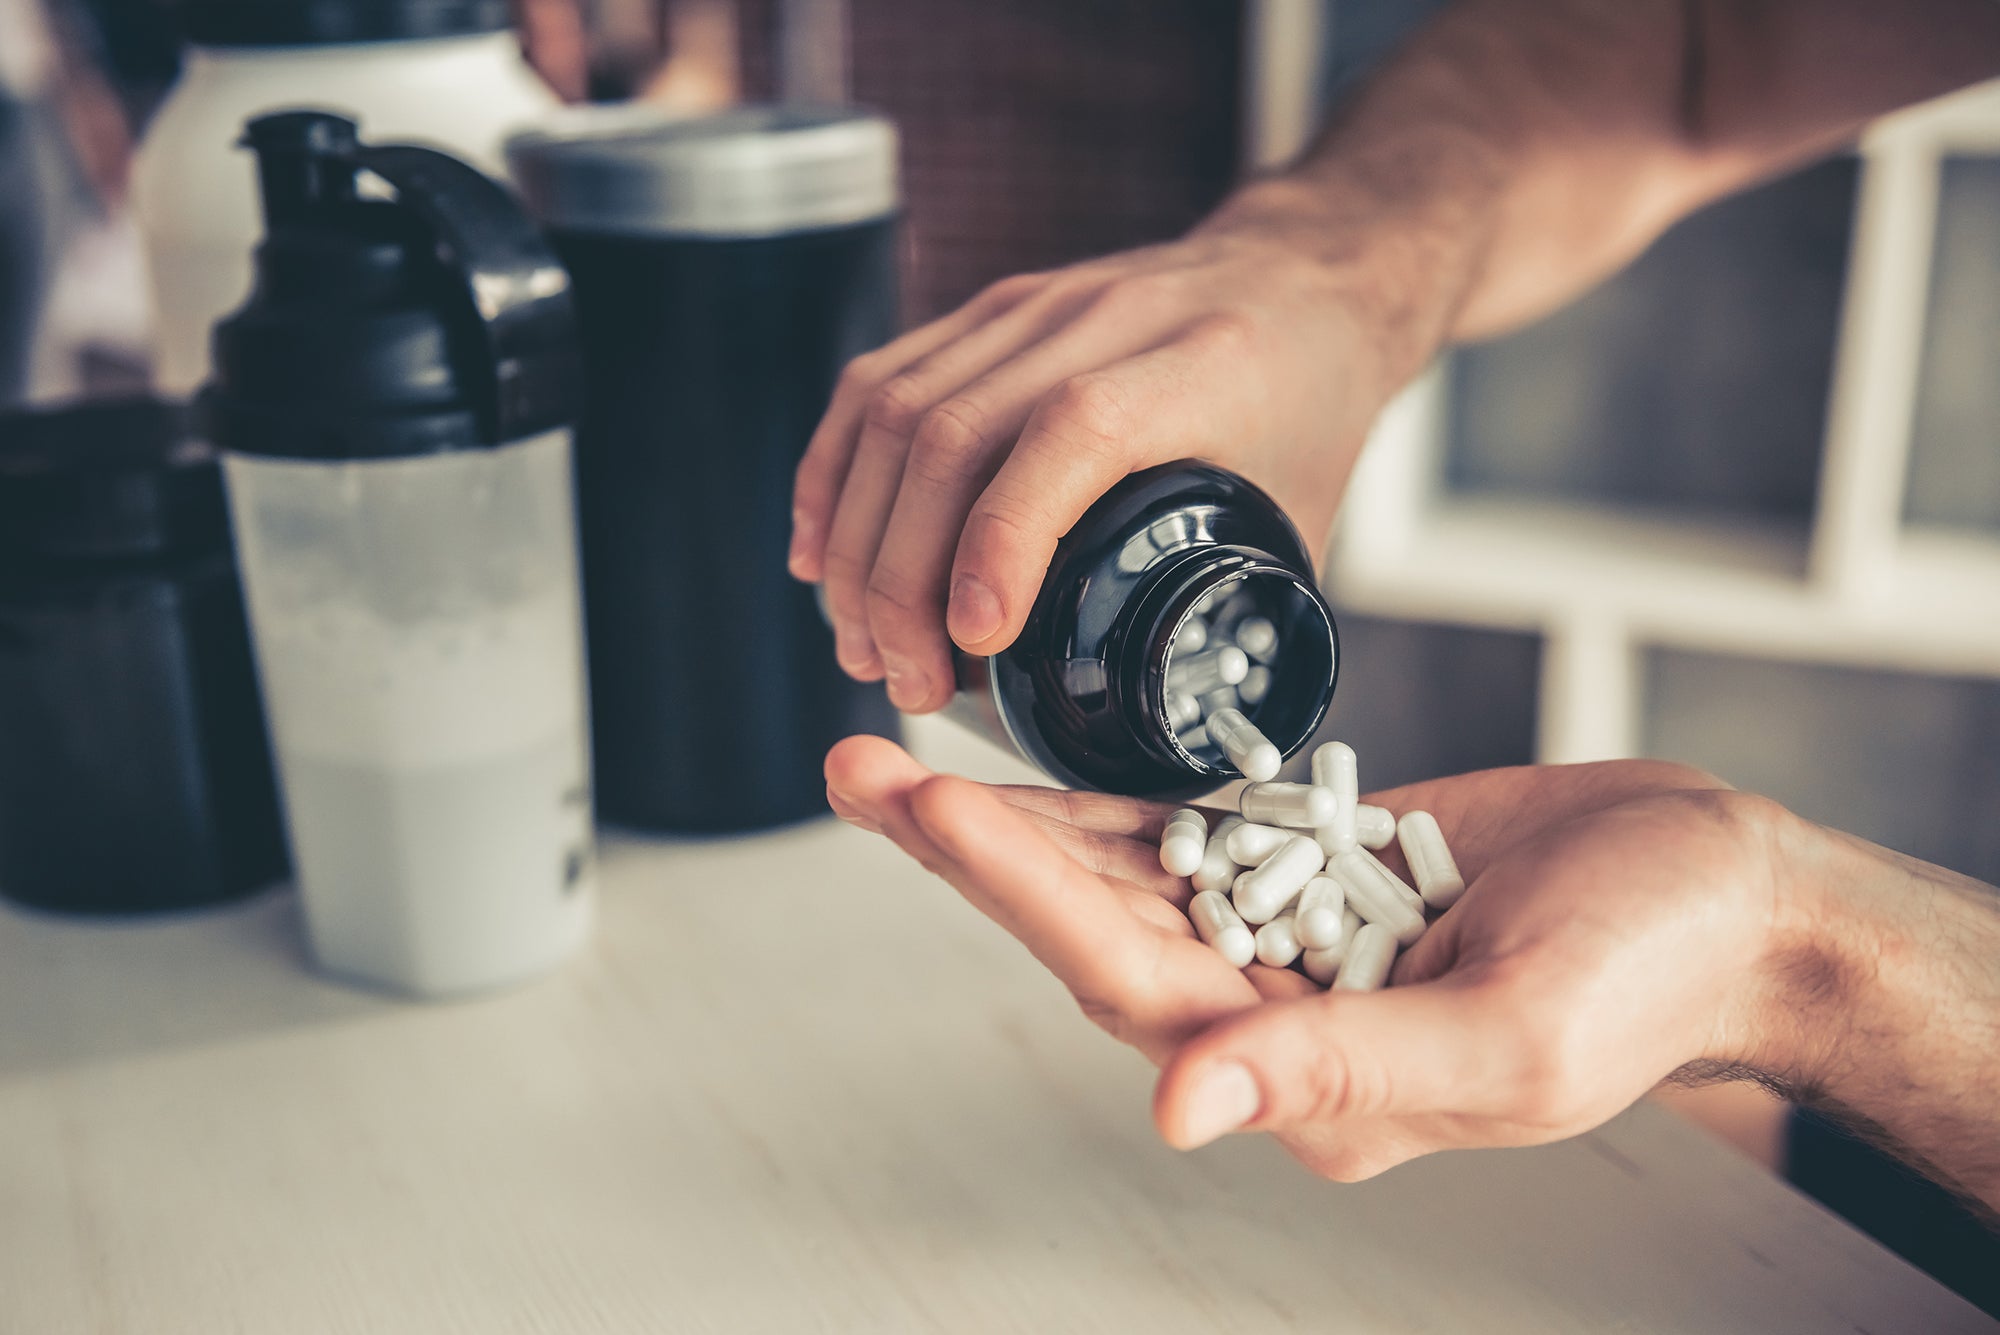 The science behind the top 4 sports supplements